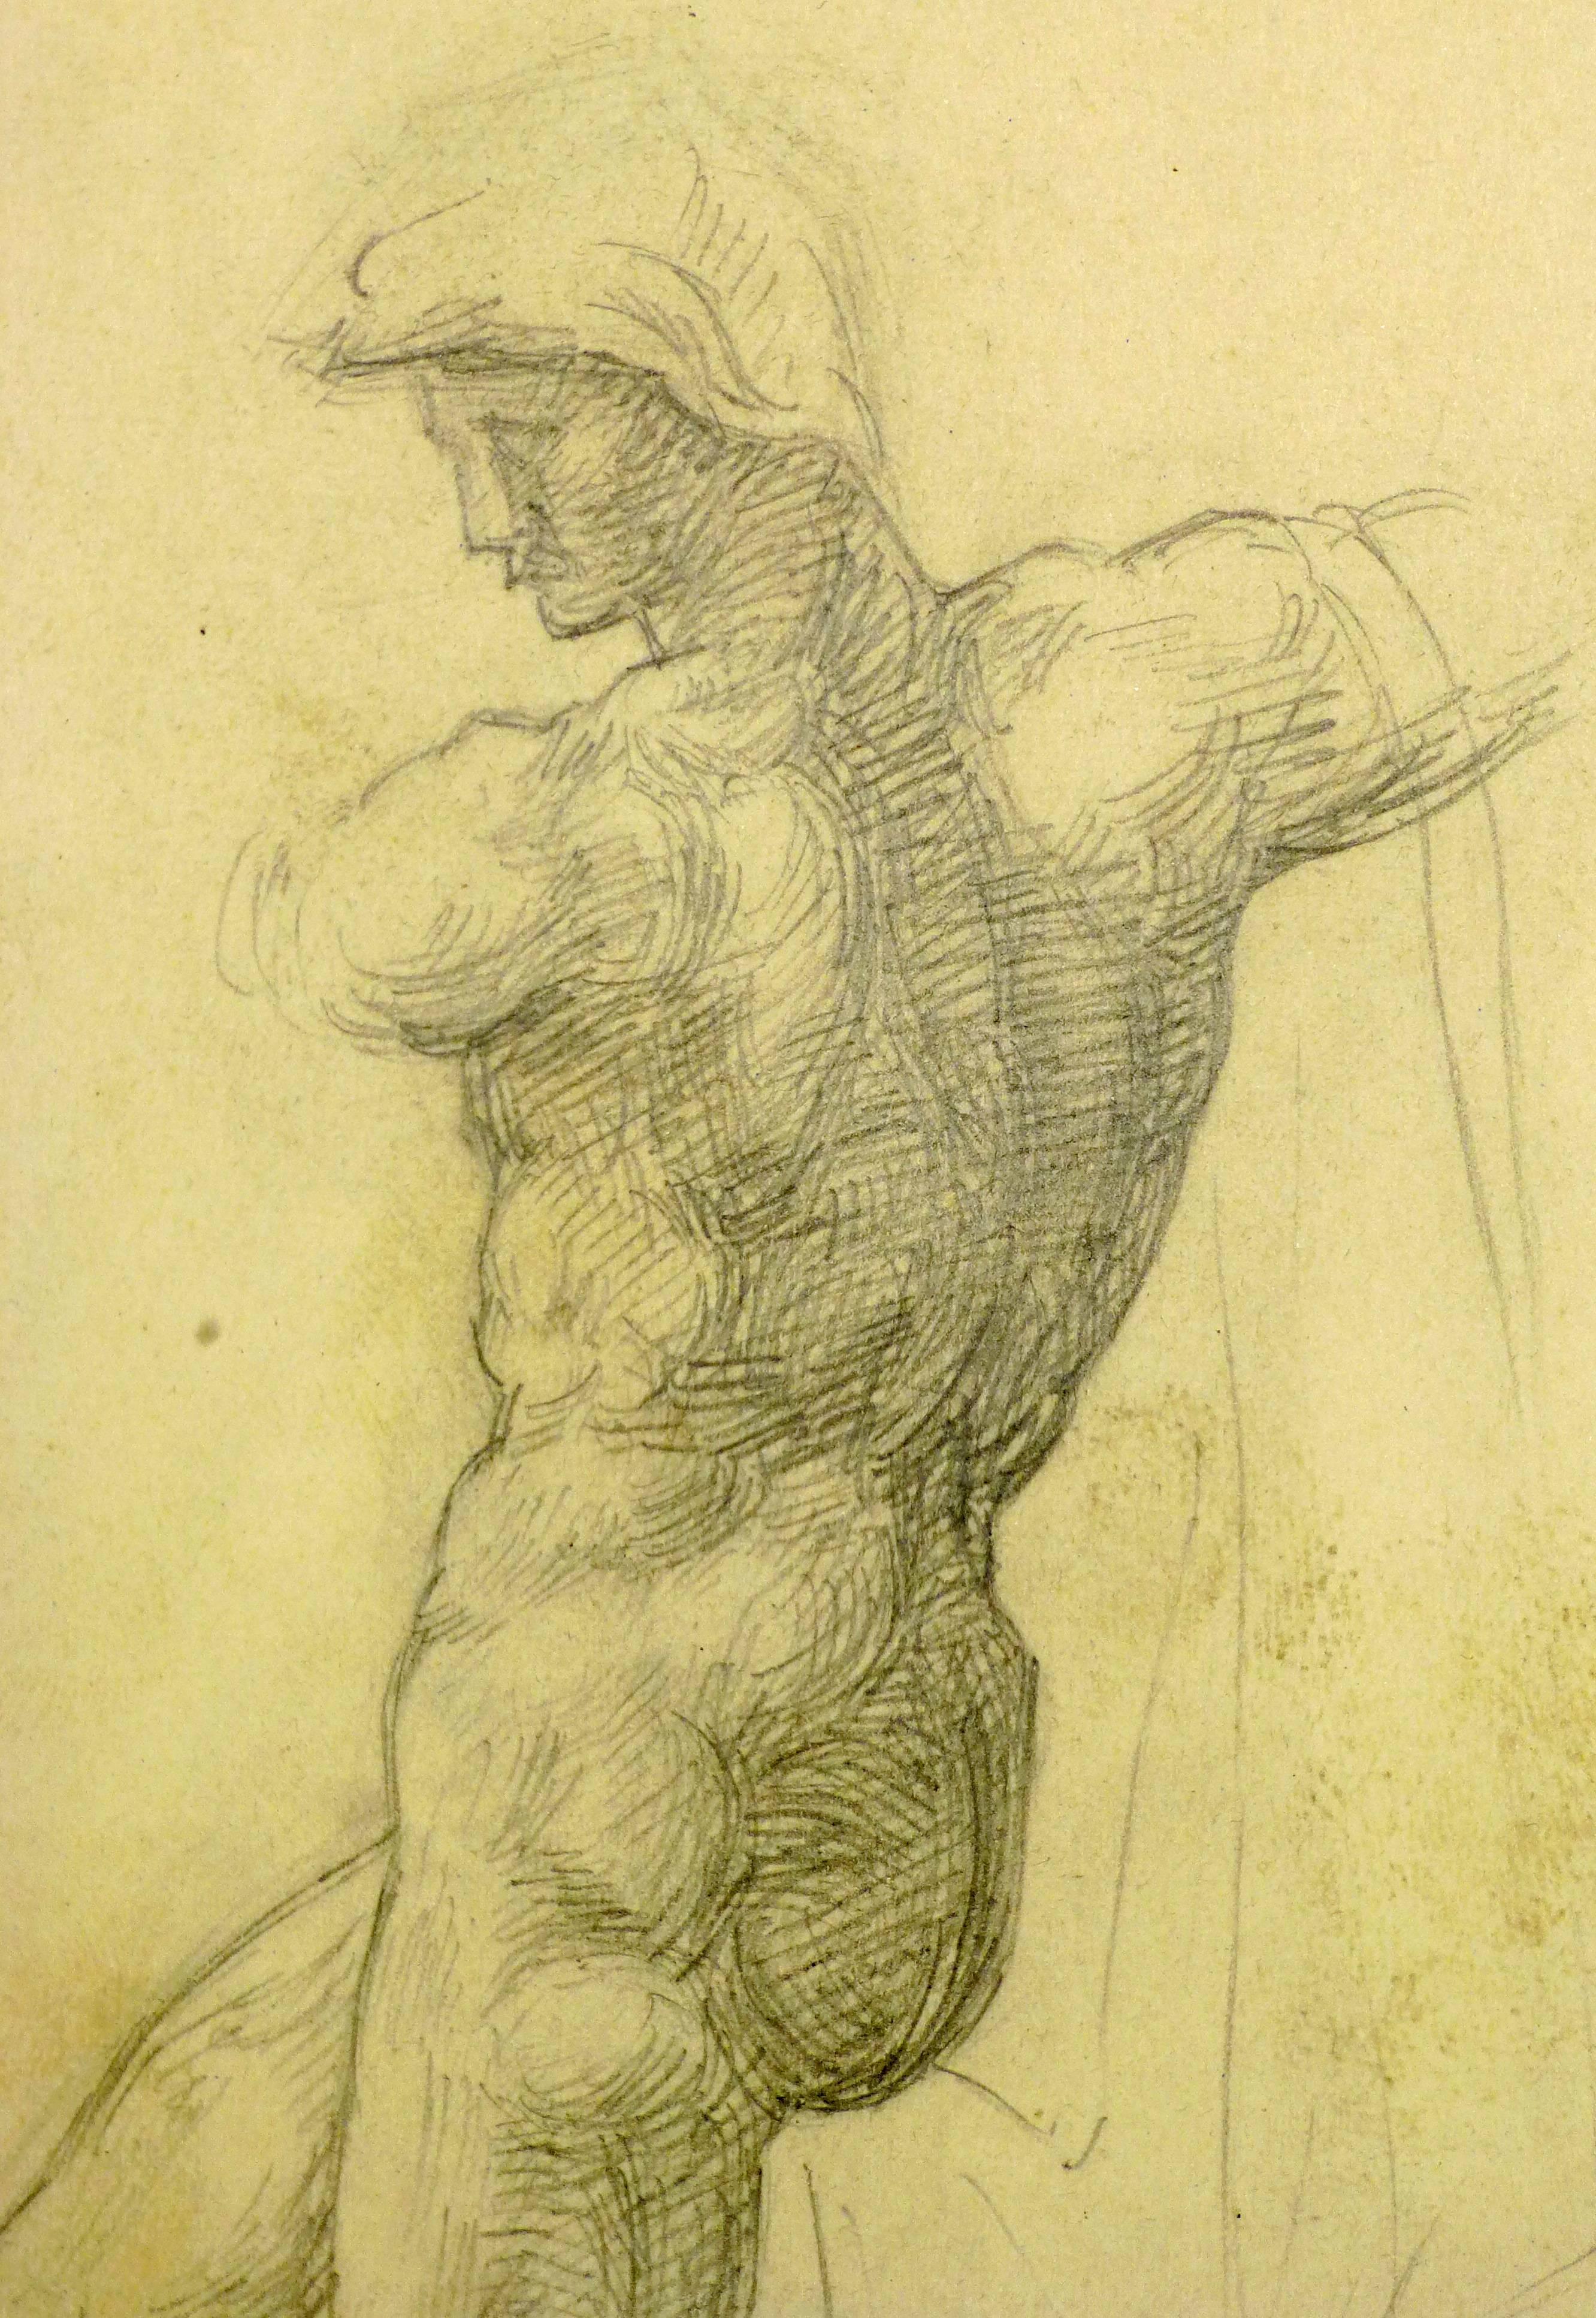 French pencil sketch of nude male figure shown strength and composure, circa 1910.

Original artwork on paper displayed on a white mat with a gold border. Mat fits a standard-sized frame. Archival plastic sleeve and Certificate of Authenticity